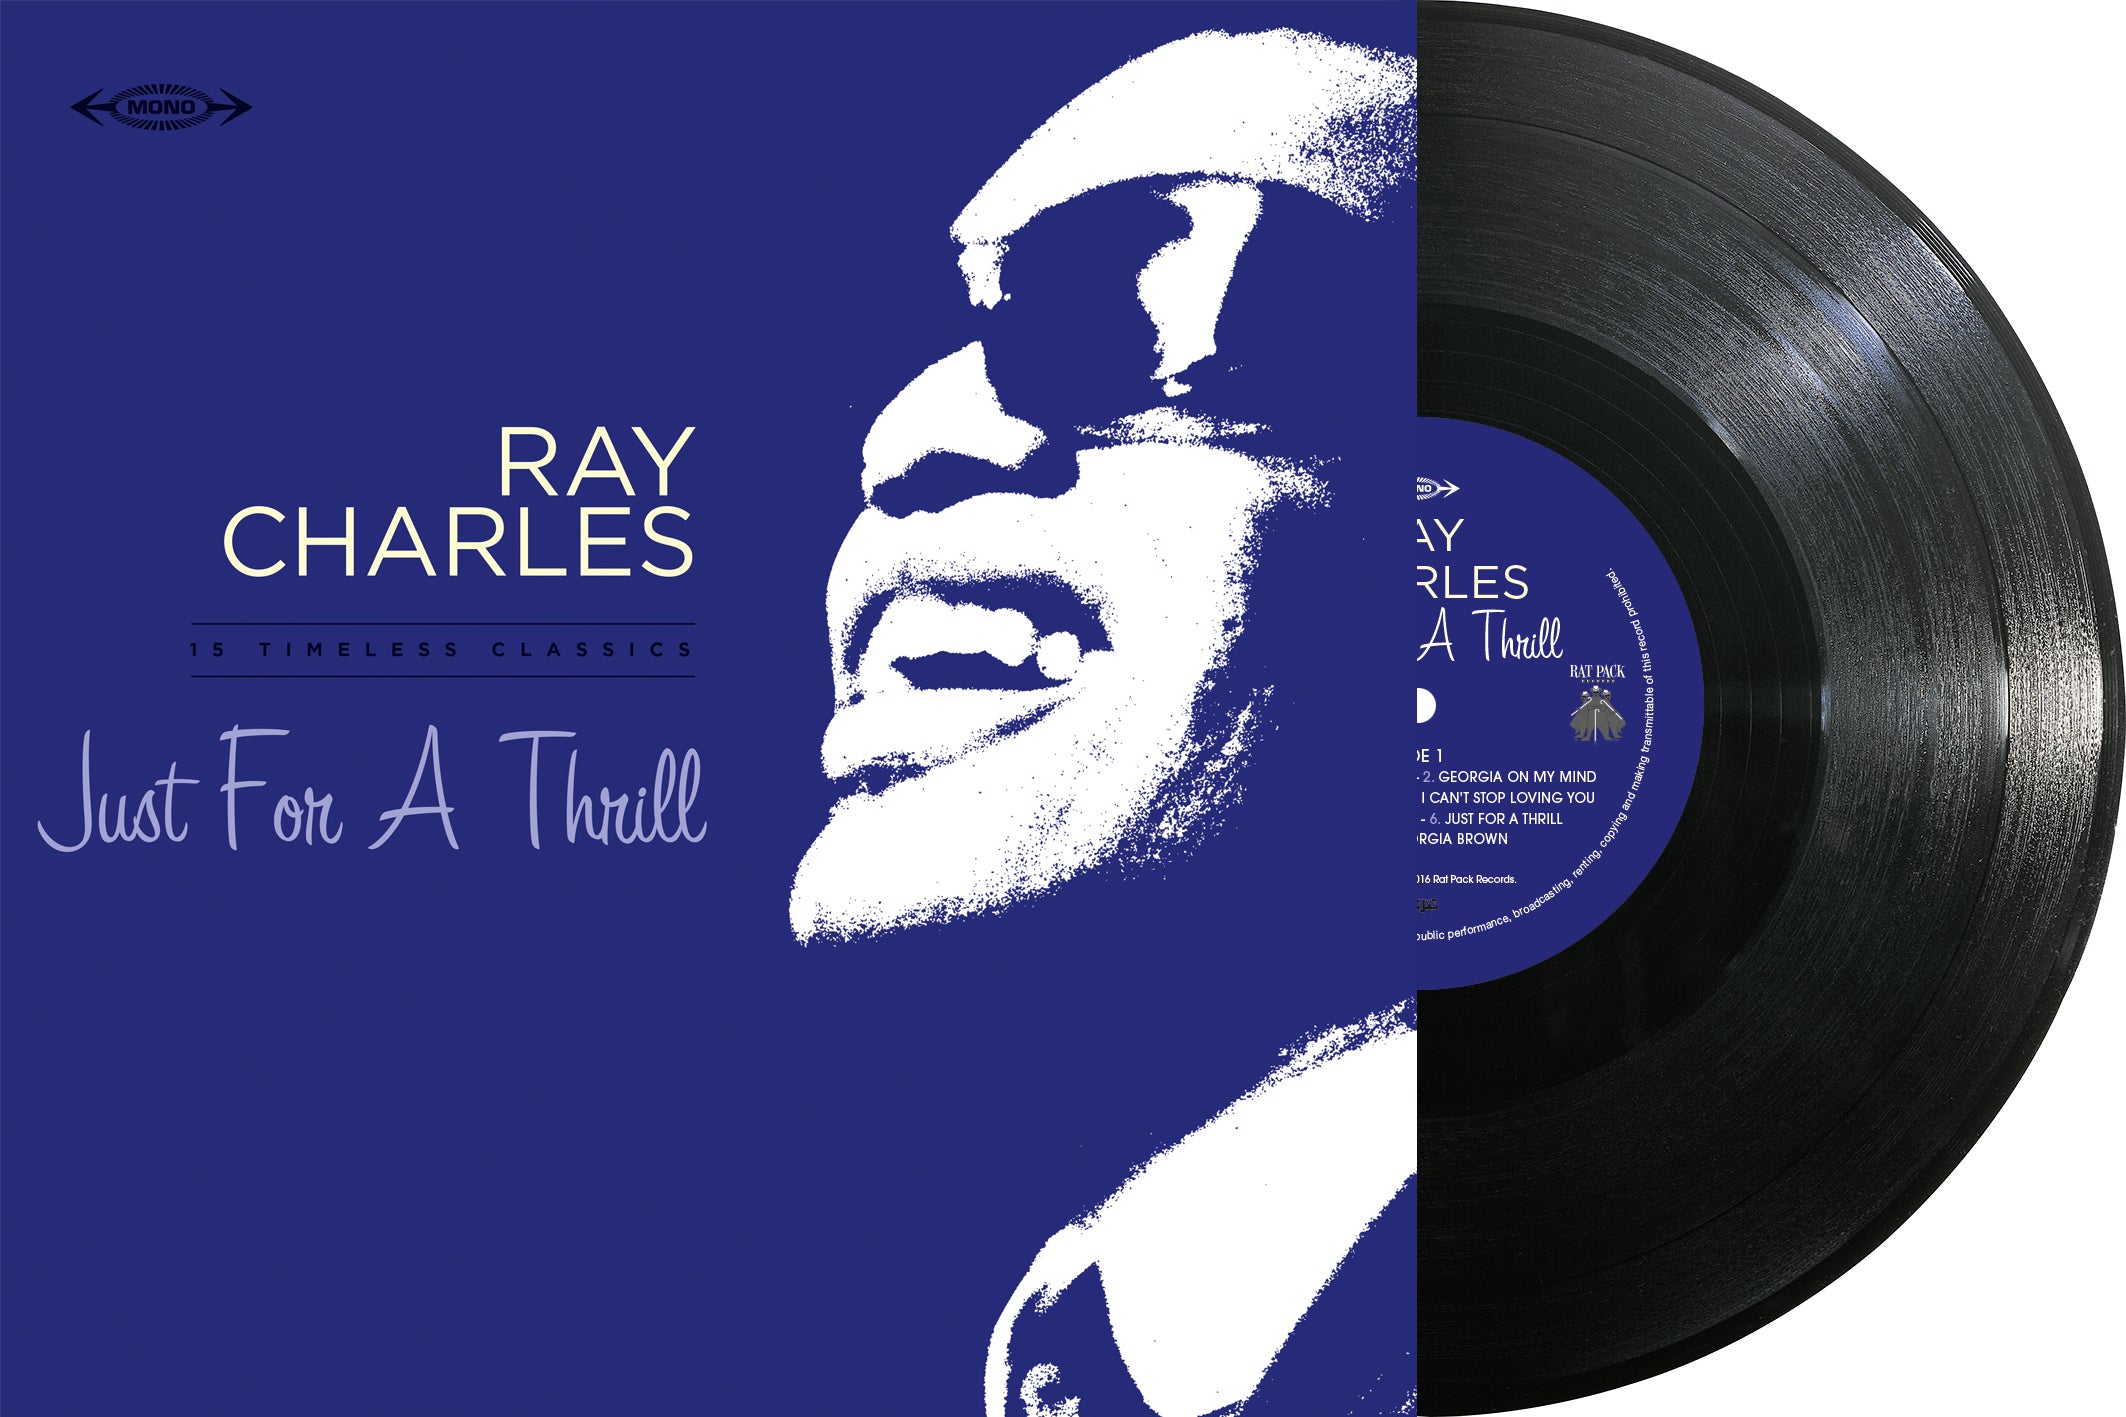 Ray Charles 33 Tours - Just For A Thrill Vinyl